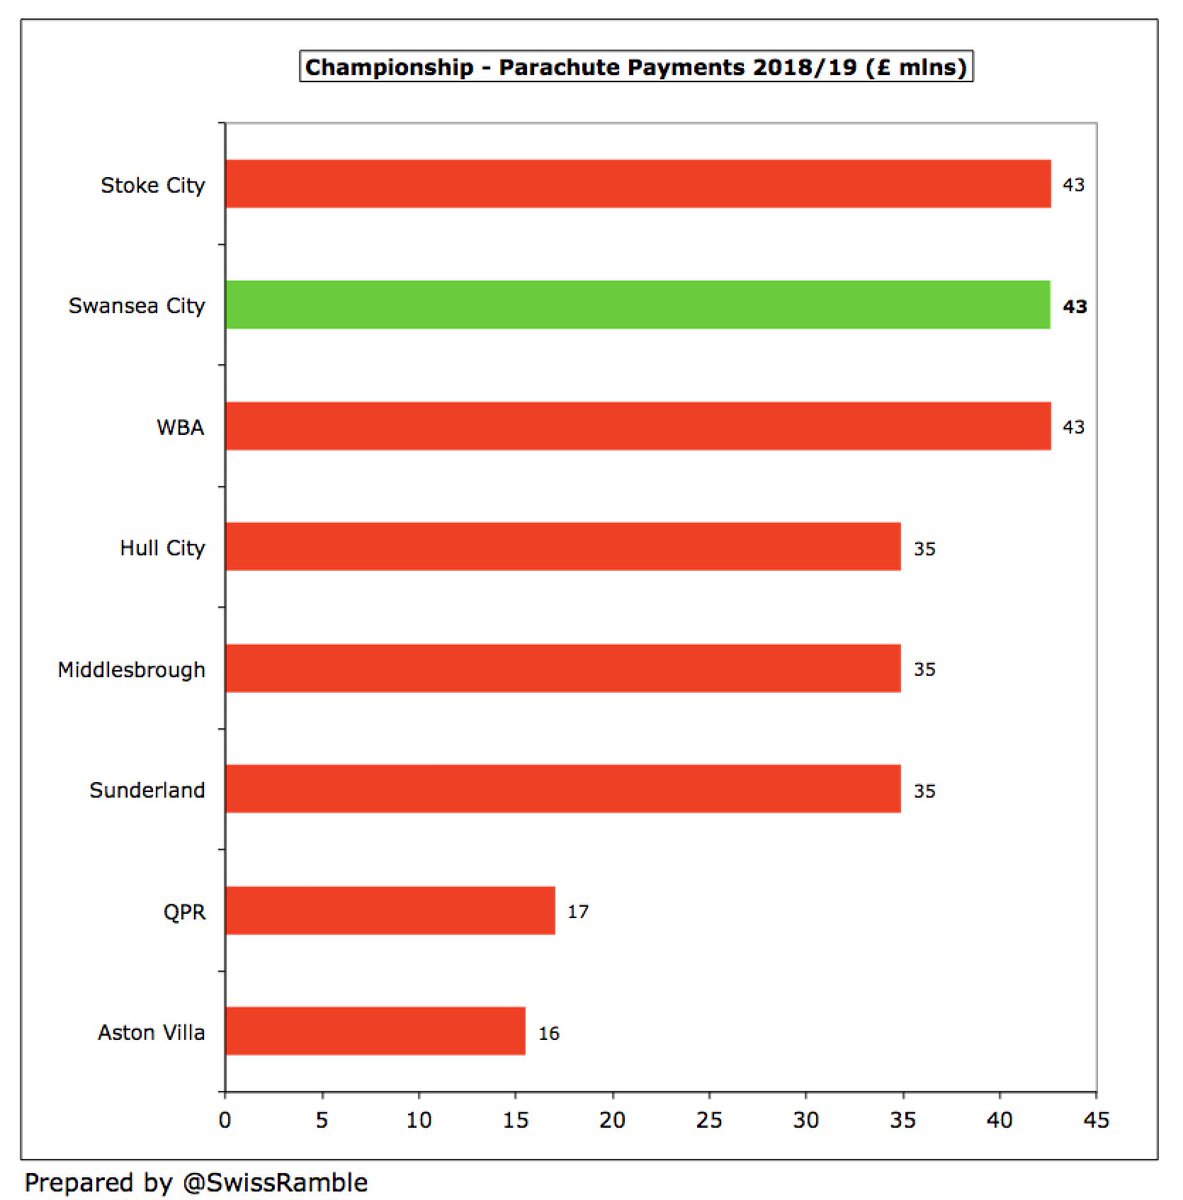 Obviously,  #Swans benefited from £34m parachute payment, though this was down from £43m in the previous season. Six other clubs received parachutes in 2019/20, led by Cardiff City,  #FFC and  #HTAFC (£42m), followed by Stoke City and WBA (£34m)